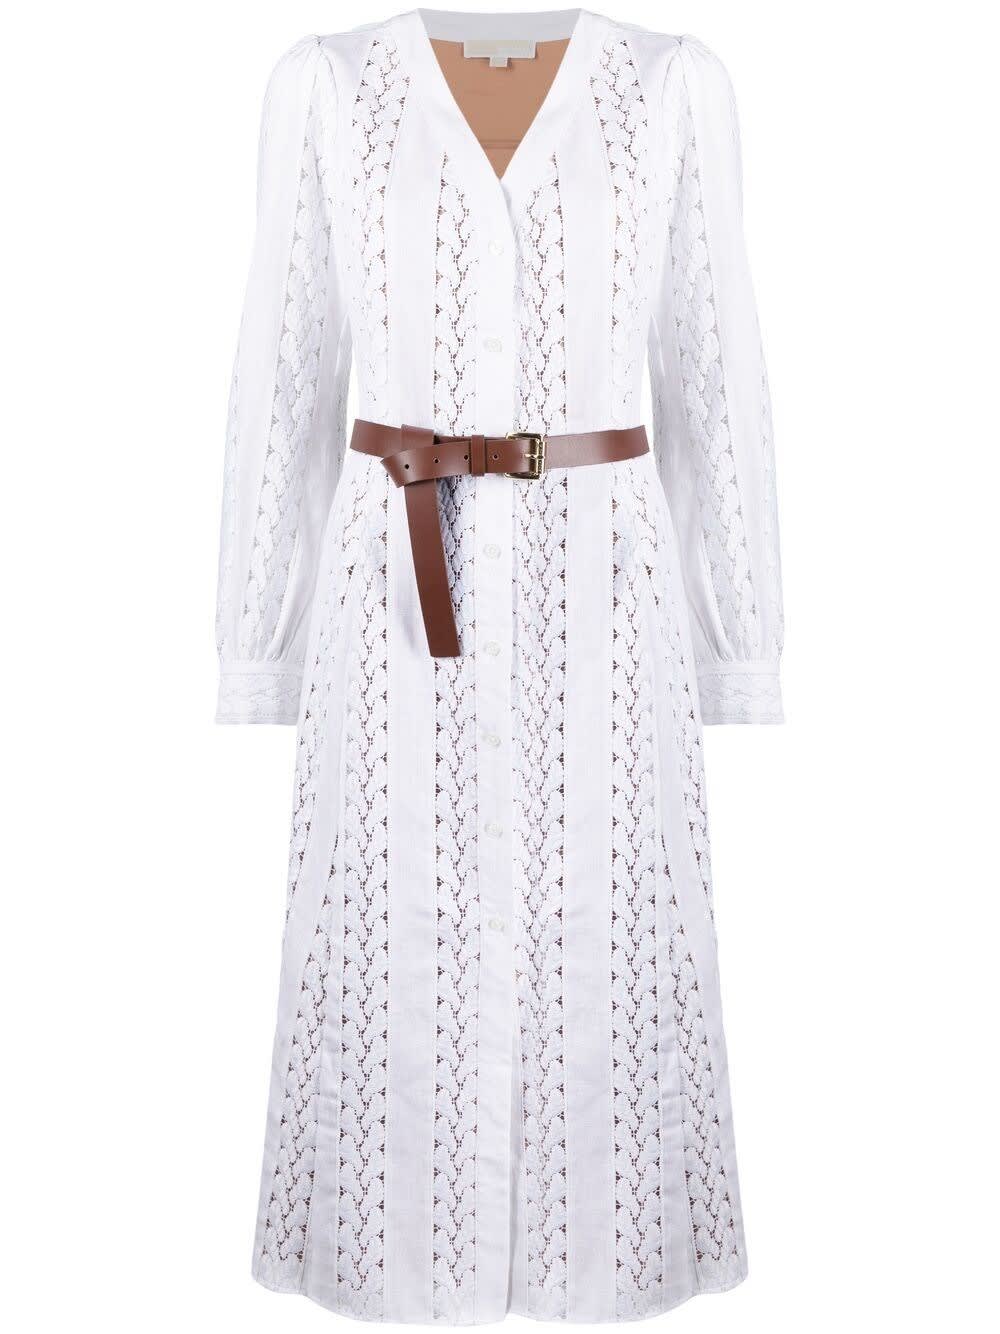 MICHAEL Michael Kors White Perforated Dress With Belt